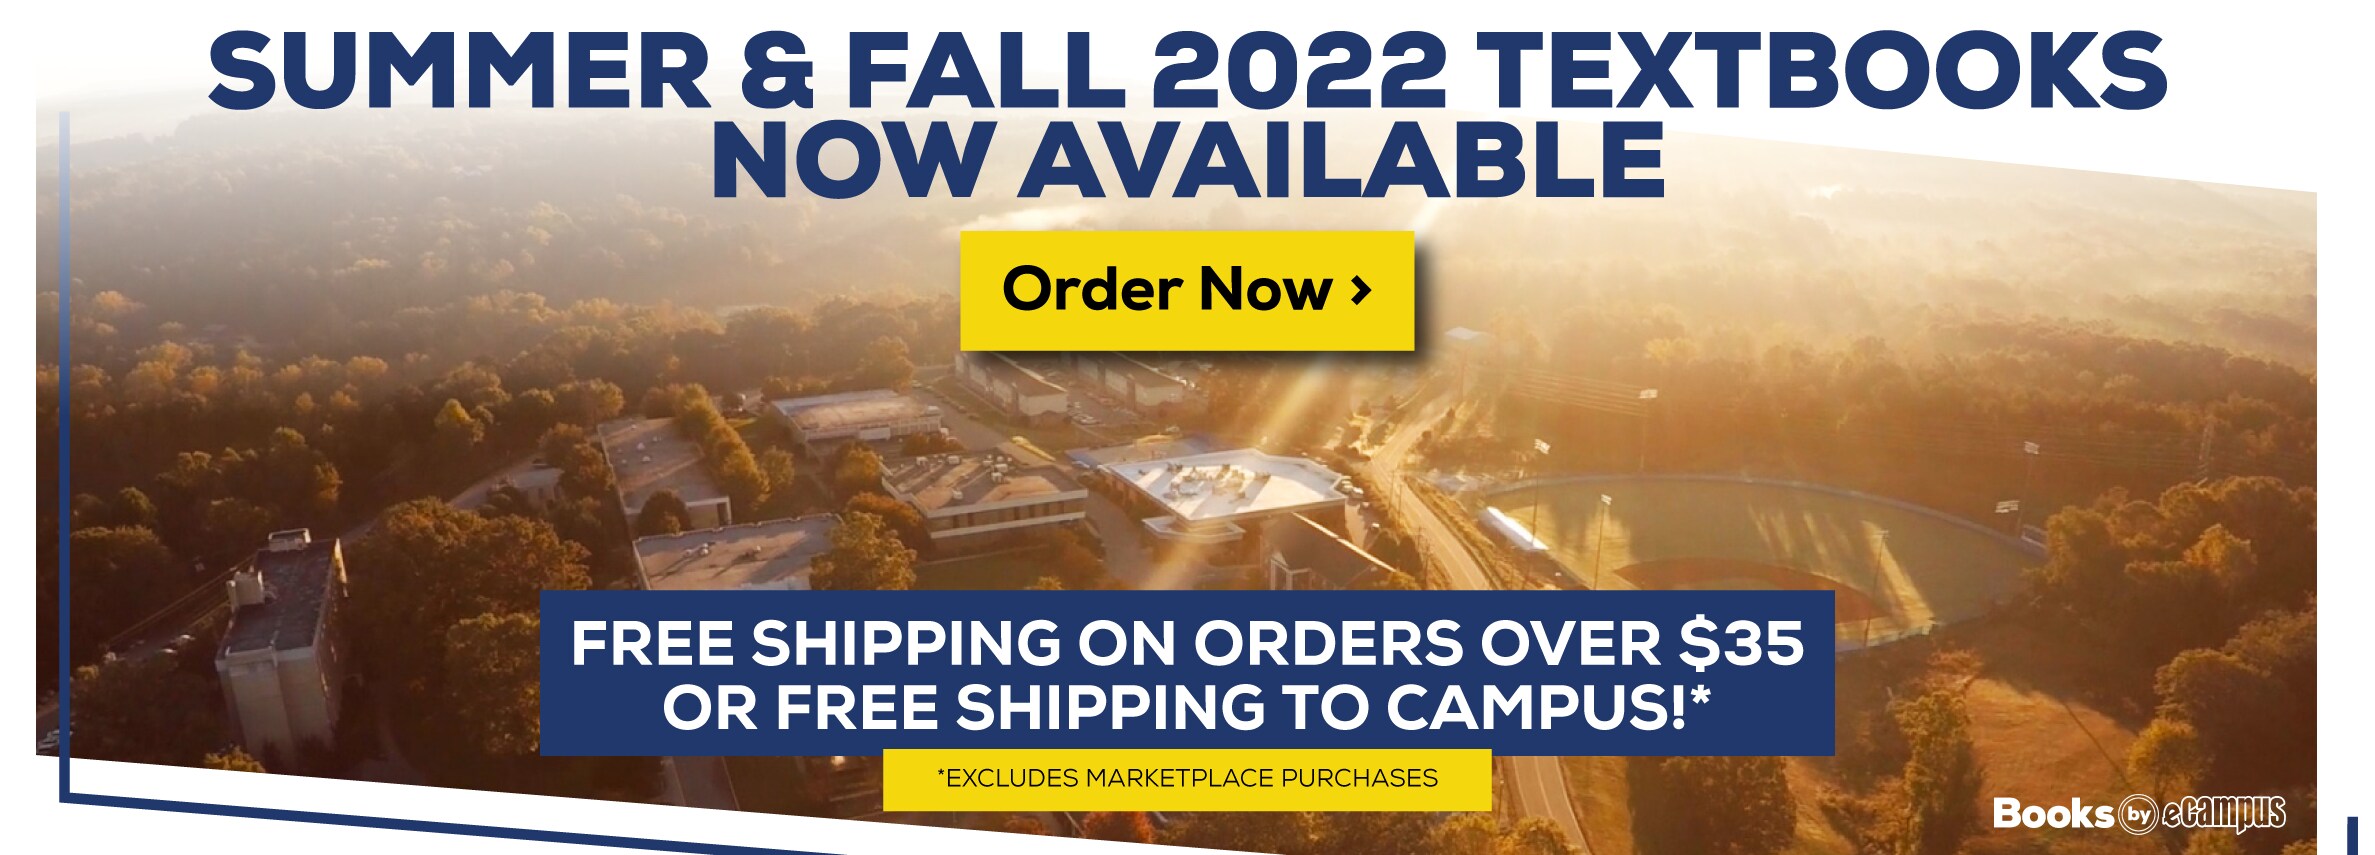 Summer and Fall 2022 Textbooks Now Available. Free shipping on all orders over $35 or free shipping to campus! Excludes marketplace purchases. Order Now